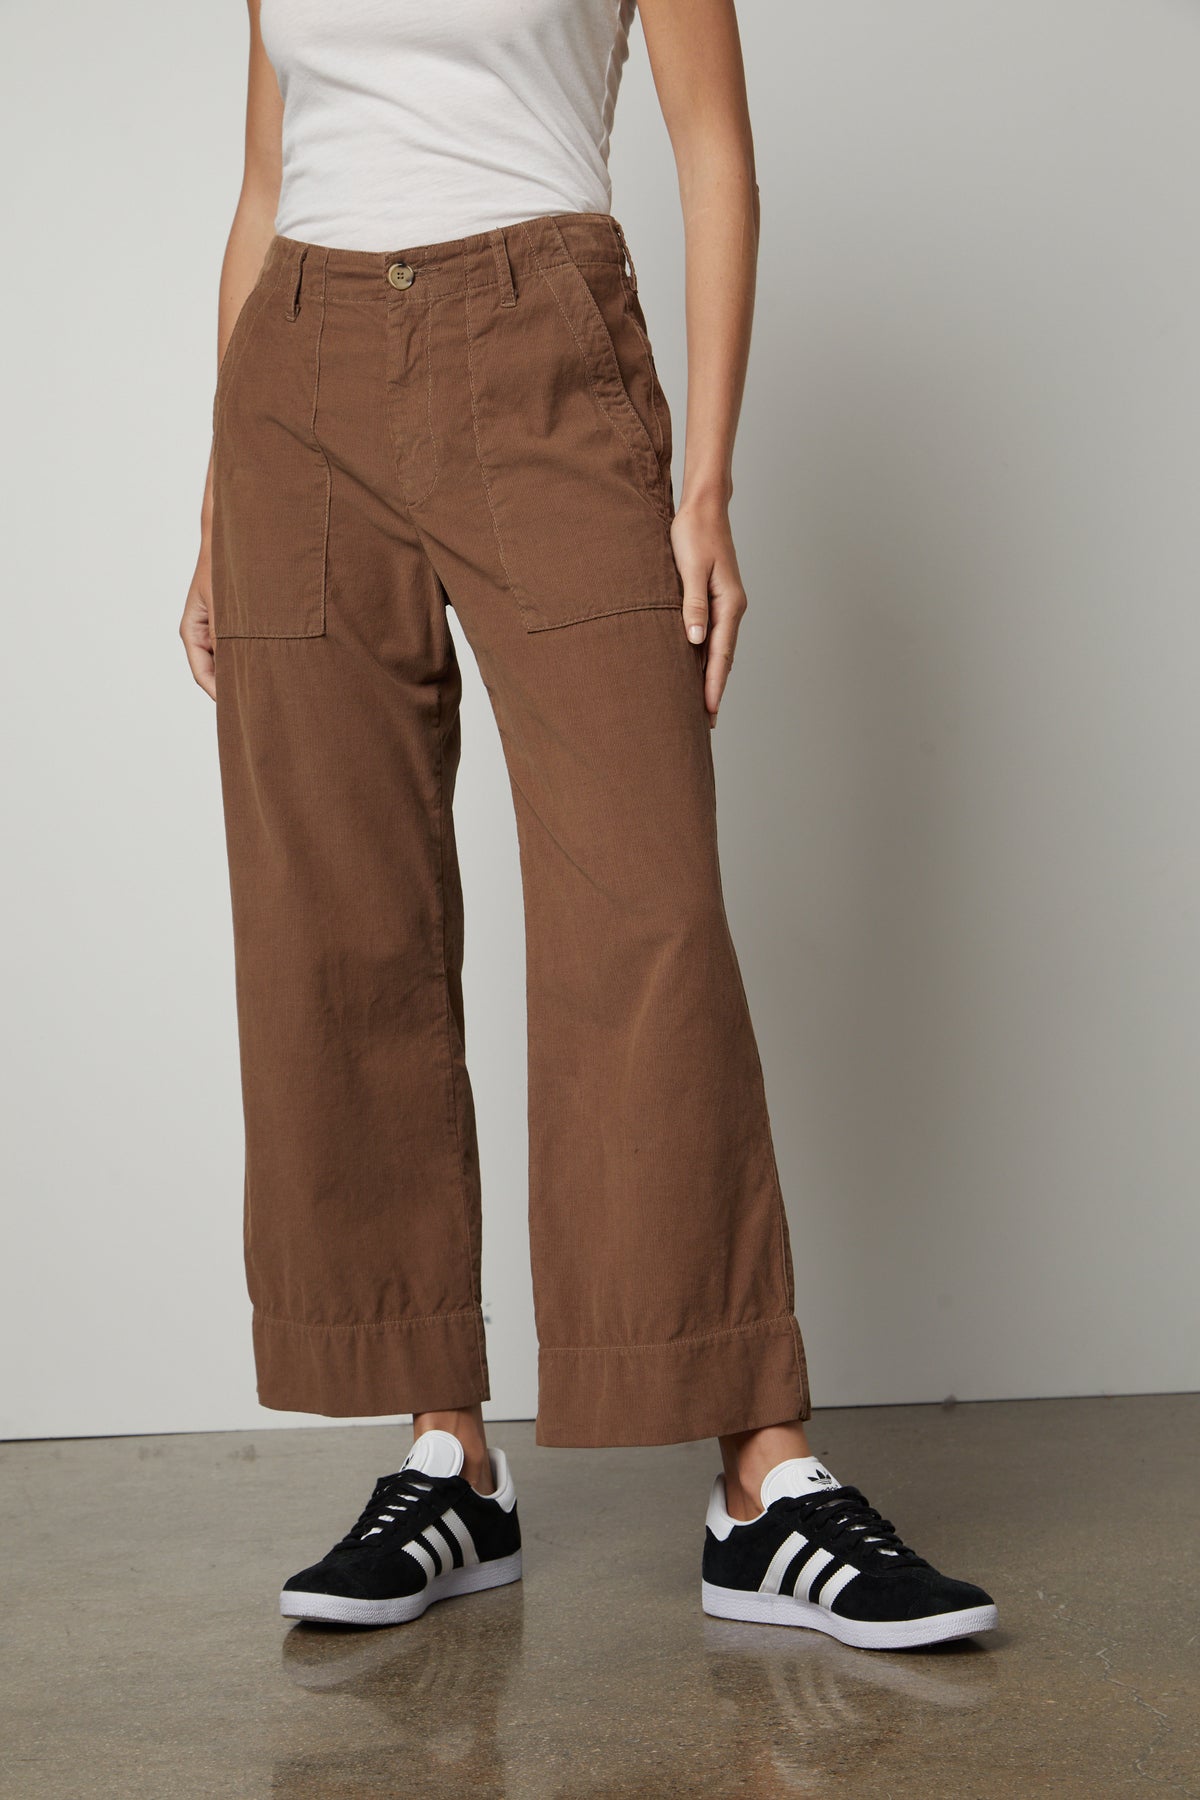 A woman wearing Velvet by Graham & Spencer's VERA CORDUROY WIDE LEG PANT and white sneakers.-26914938585281